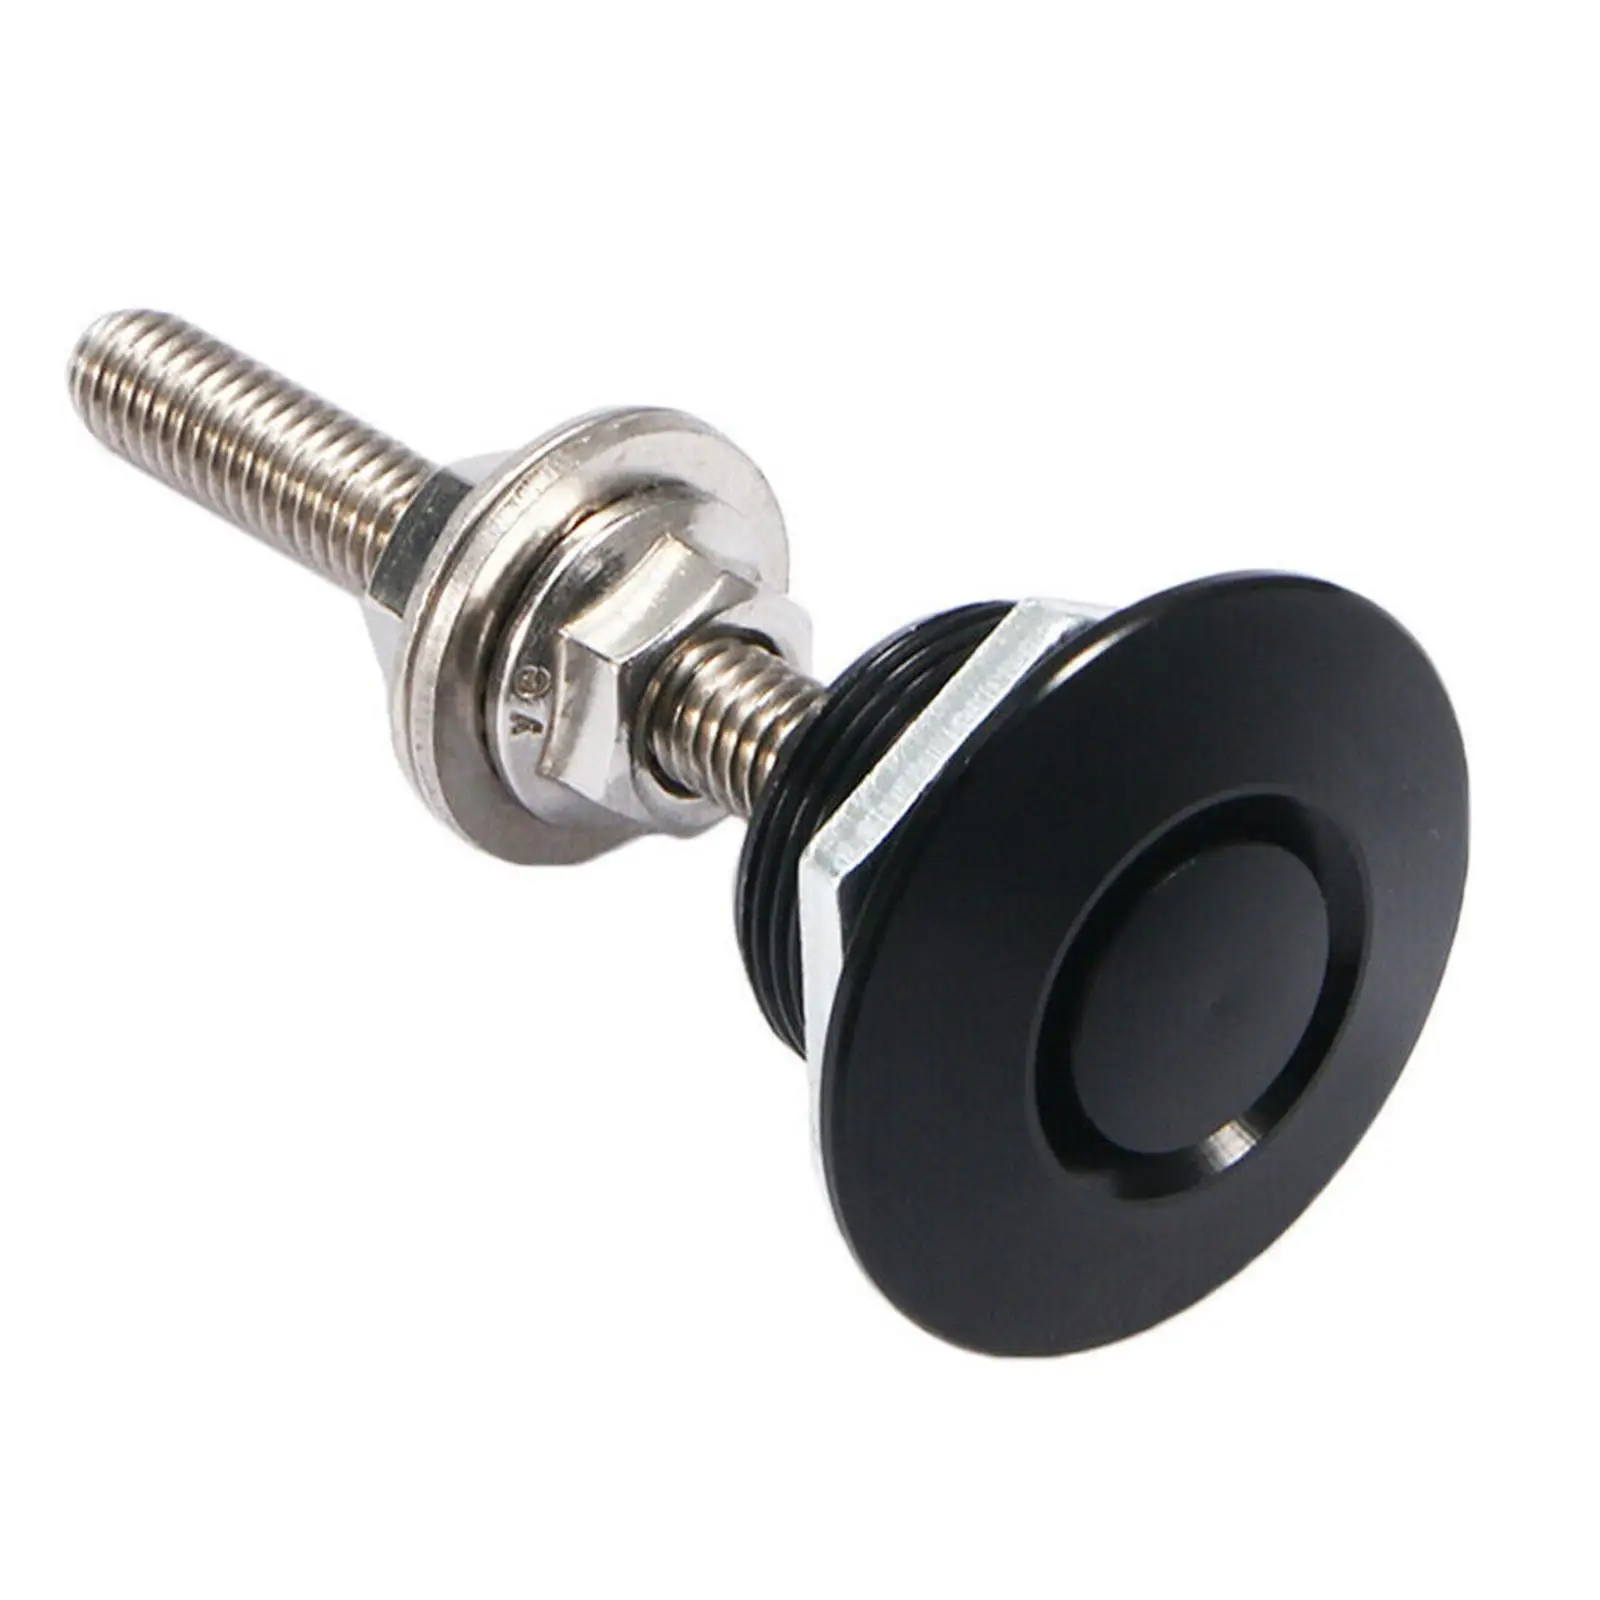 3cm Bonnets Hood Pins Lock Clip Quick Release Quick Latch Stainless Steel Screw